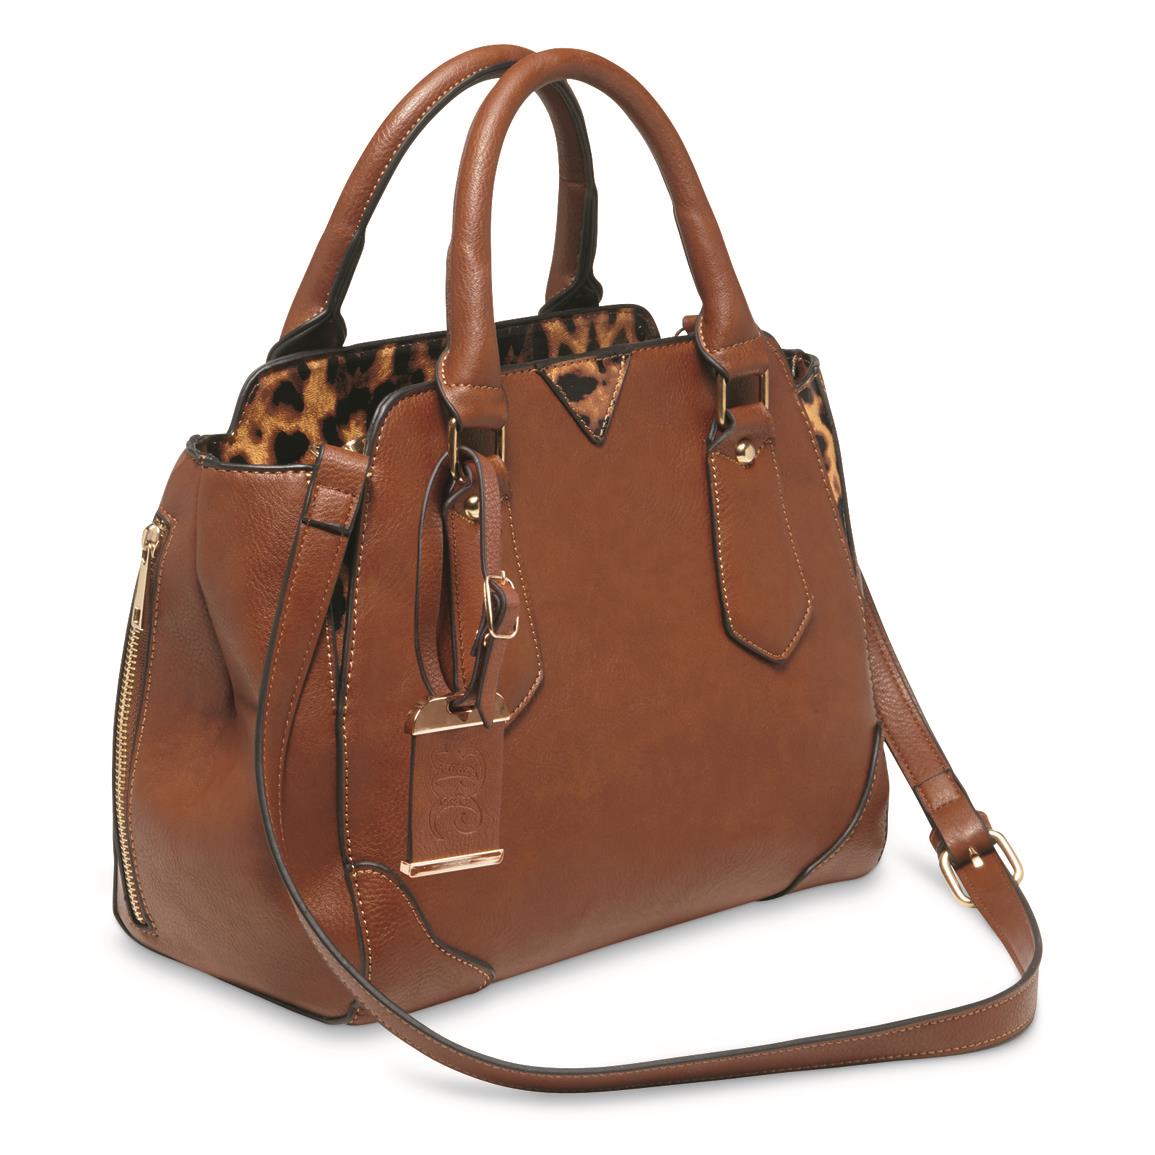 Bulldog Concealed Carry Satchel Purse with Holster, Chestnut/leopard